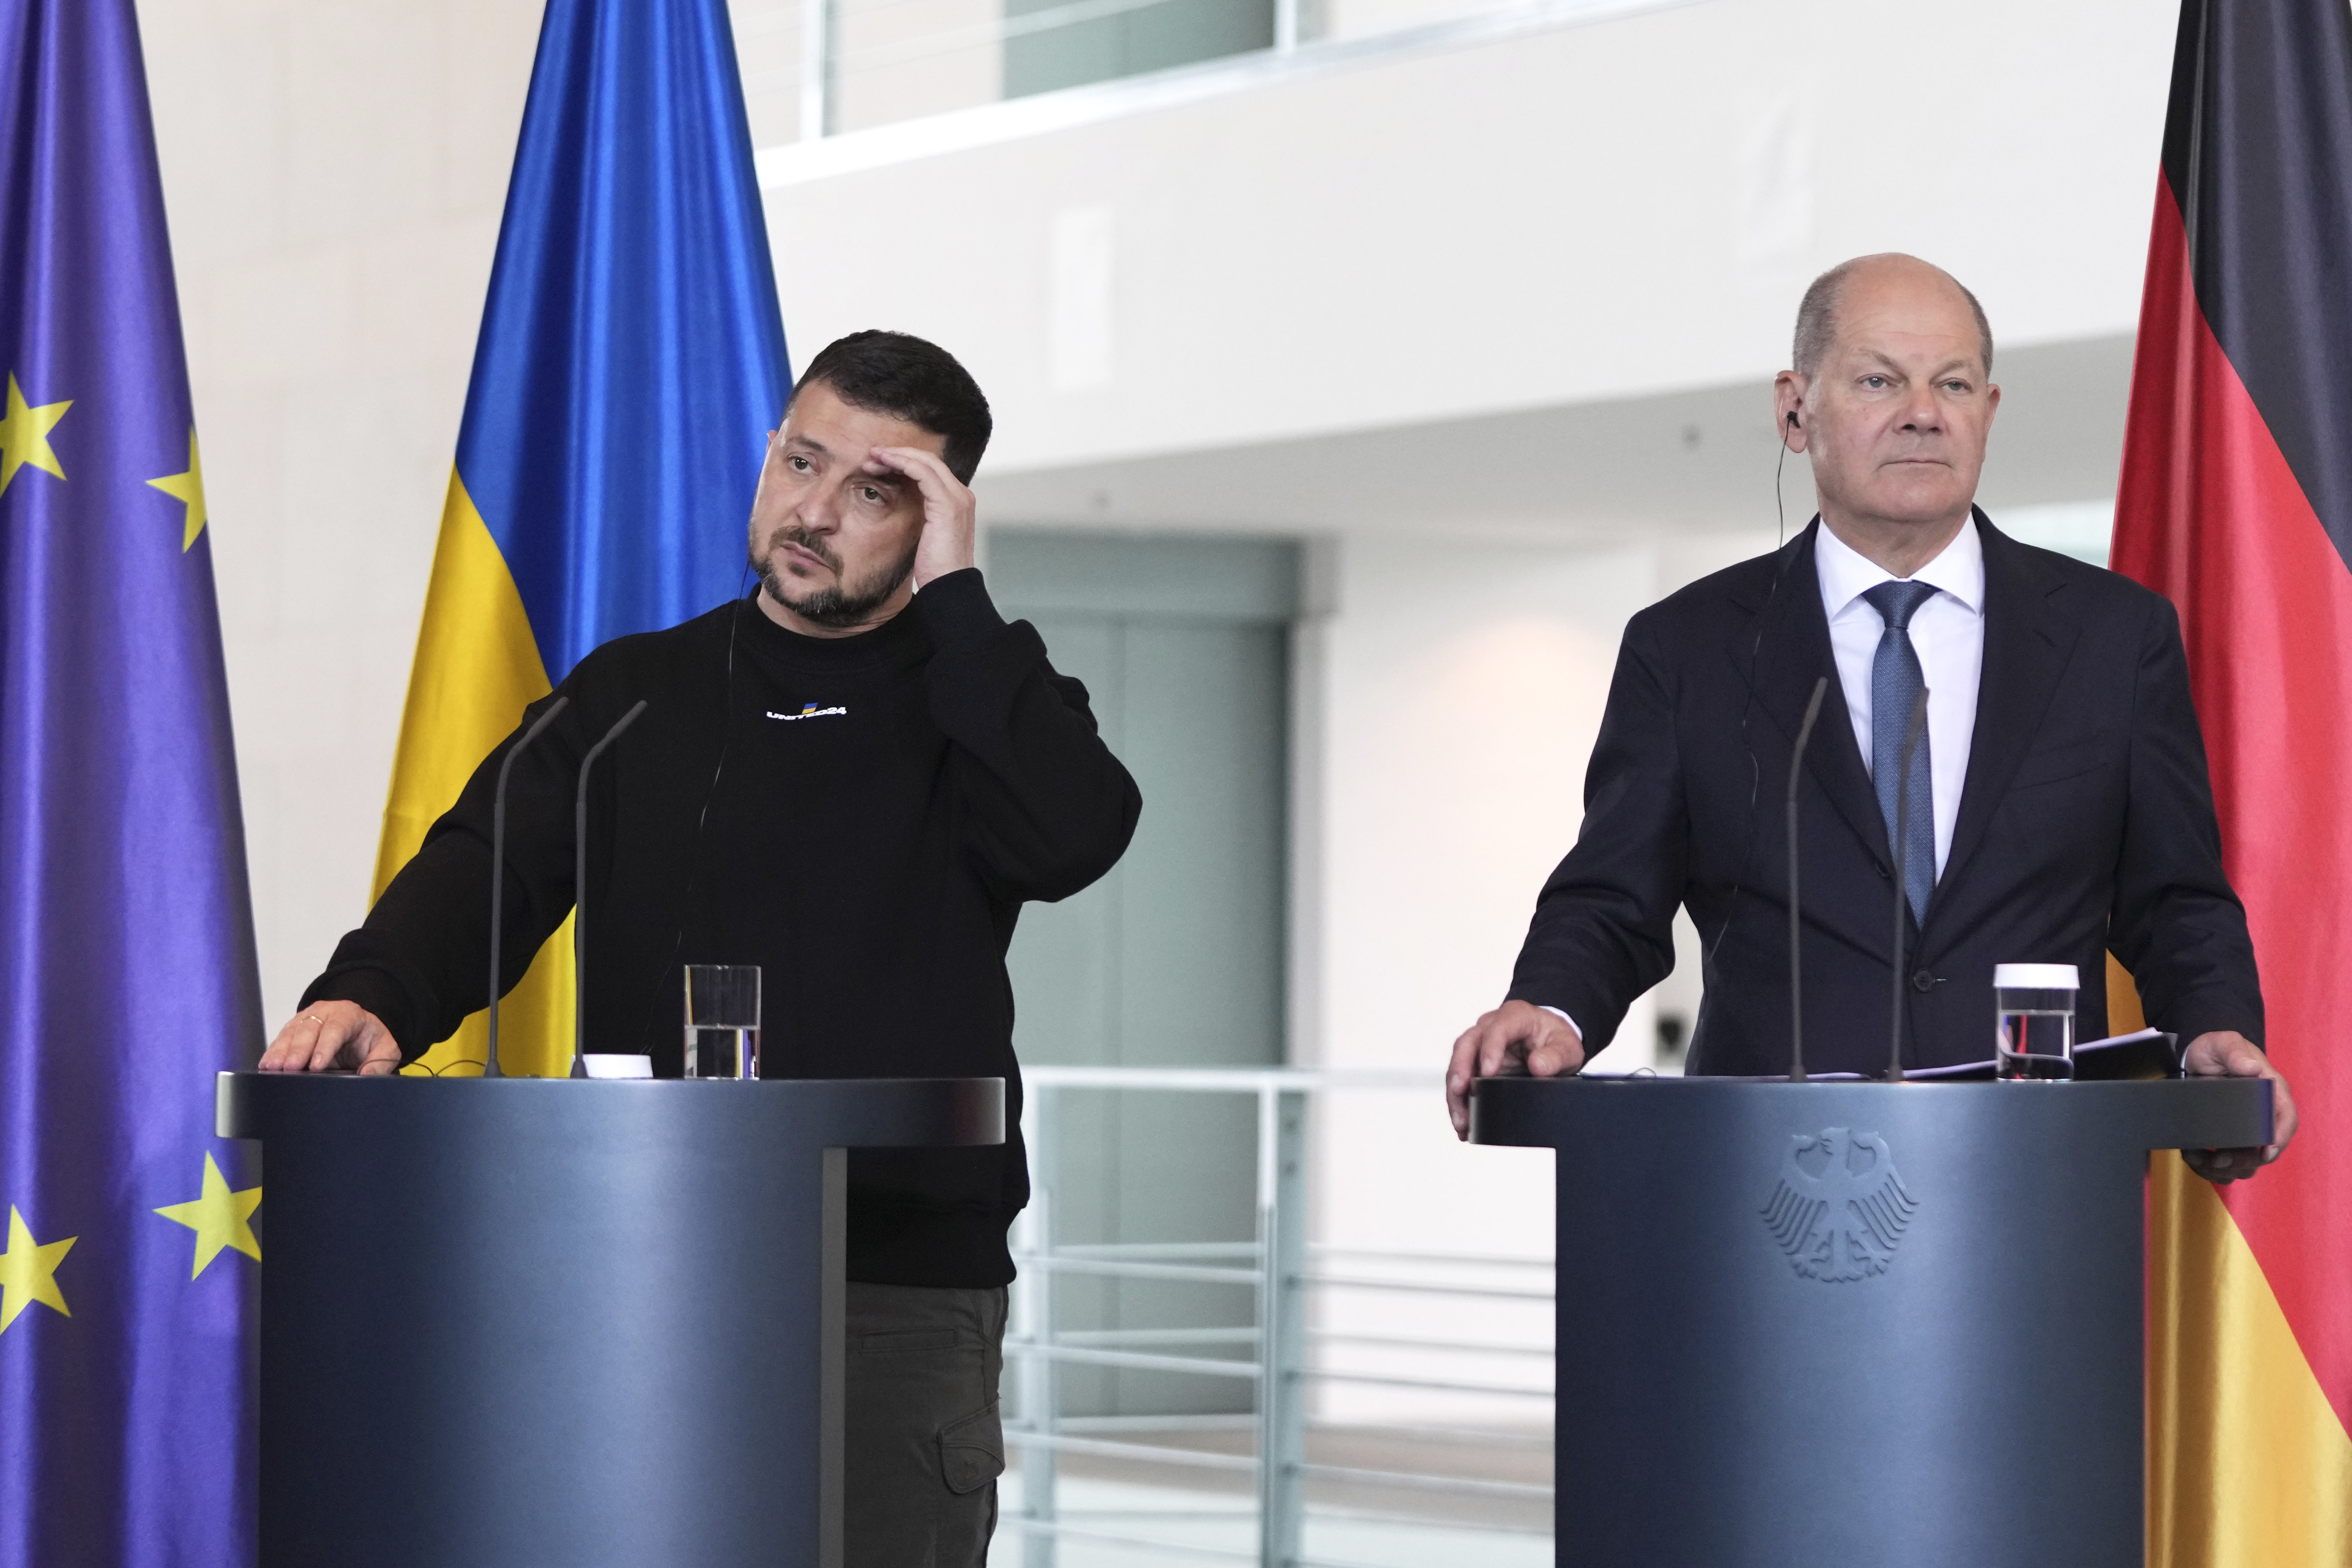 German Chancellor Olaf Scholz, right, and Ukrainian President Volodymyr Zelenskyy hold a news conference at the chancellery in Berlin, Germany, Sunday, May 14, 2023. (AP Photo/Matthias Schrader)